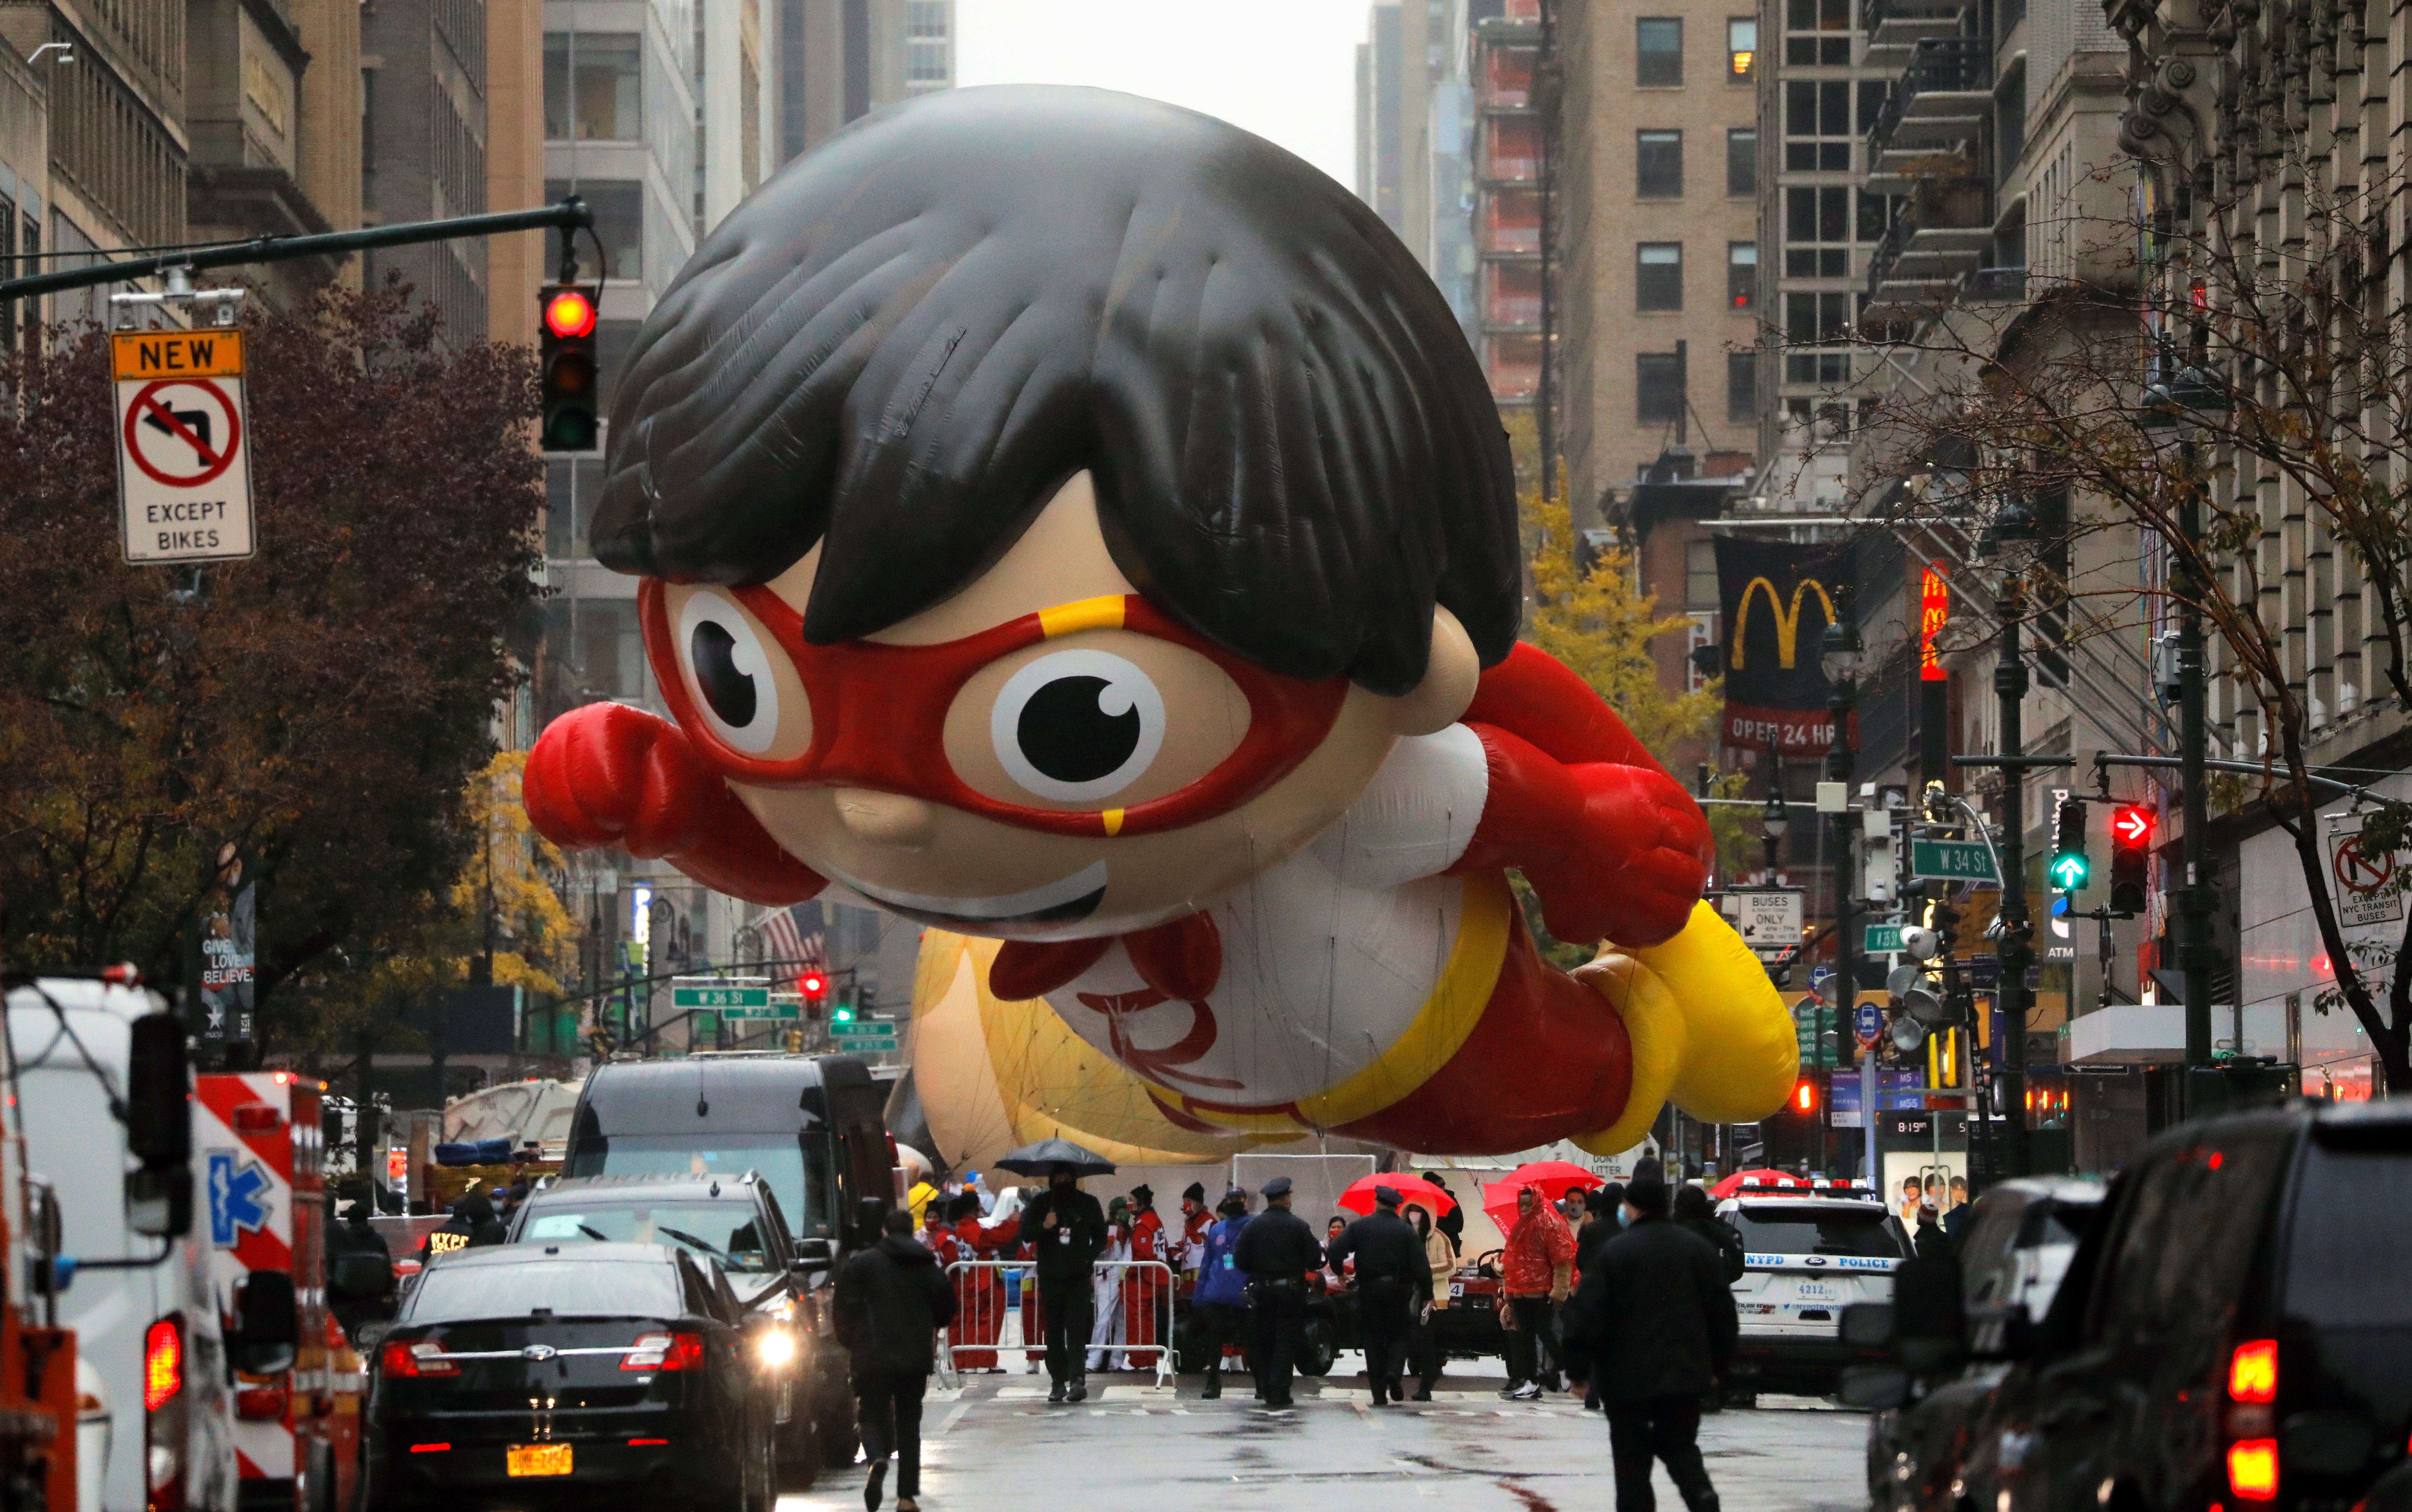 A balloon depicting Red Titan, a character from Ryan's World, is seen of ahead of the 94th Macy's Thanksgiving Day Parade